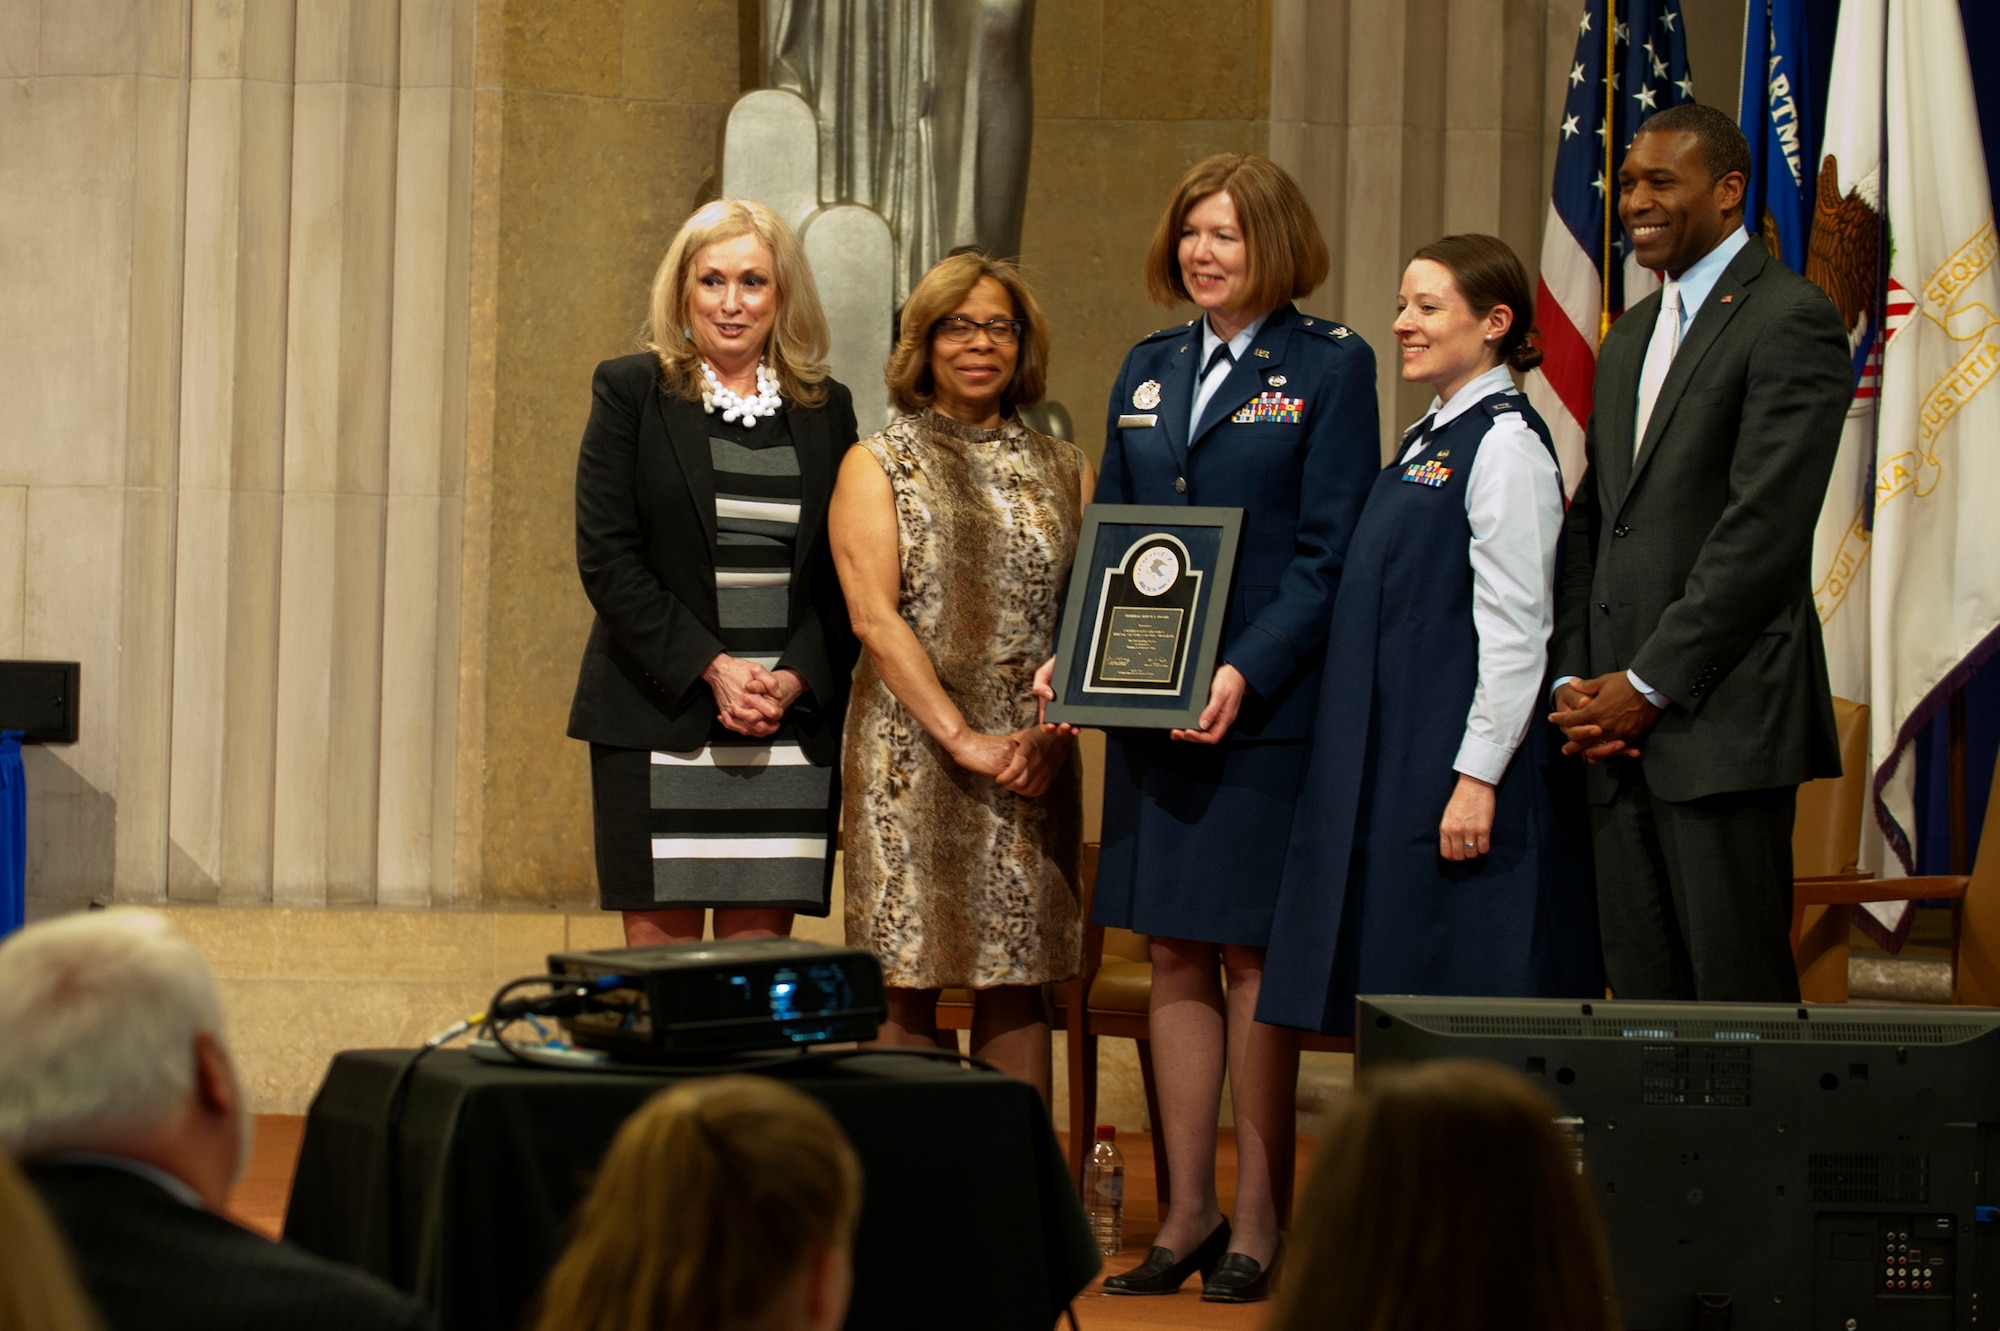 Members of the Air Force Judge Advocate General’s Corps pose for an awards photo after receiving the Federal Service Award from the Department of Justice, during the 2014 Justice Department’s National Crime Victims’ Rights Service Awards ceremony, April 9, 2014, at the Department of Justice, Washington D.C. The JAG Corps received the  Award for the implementation and administration of the Special Victims’ Counsel program.  (U.S. Air Force photo/Staff Sgt. Carlin Leslie)